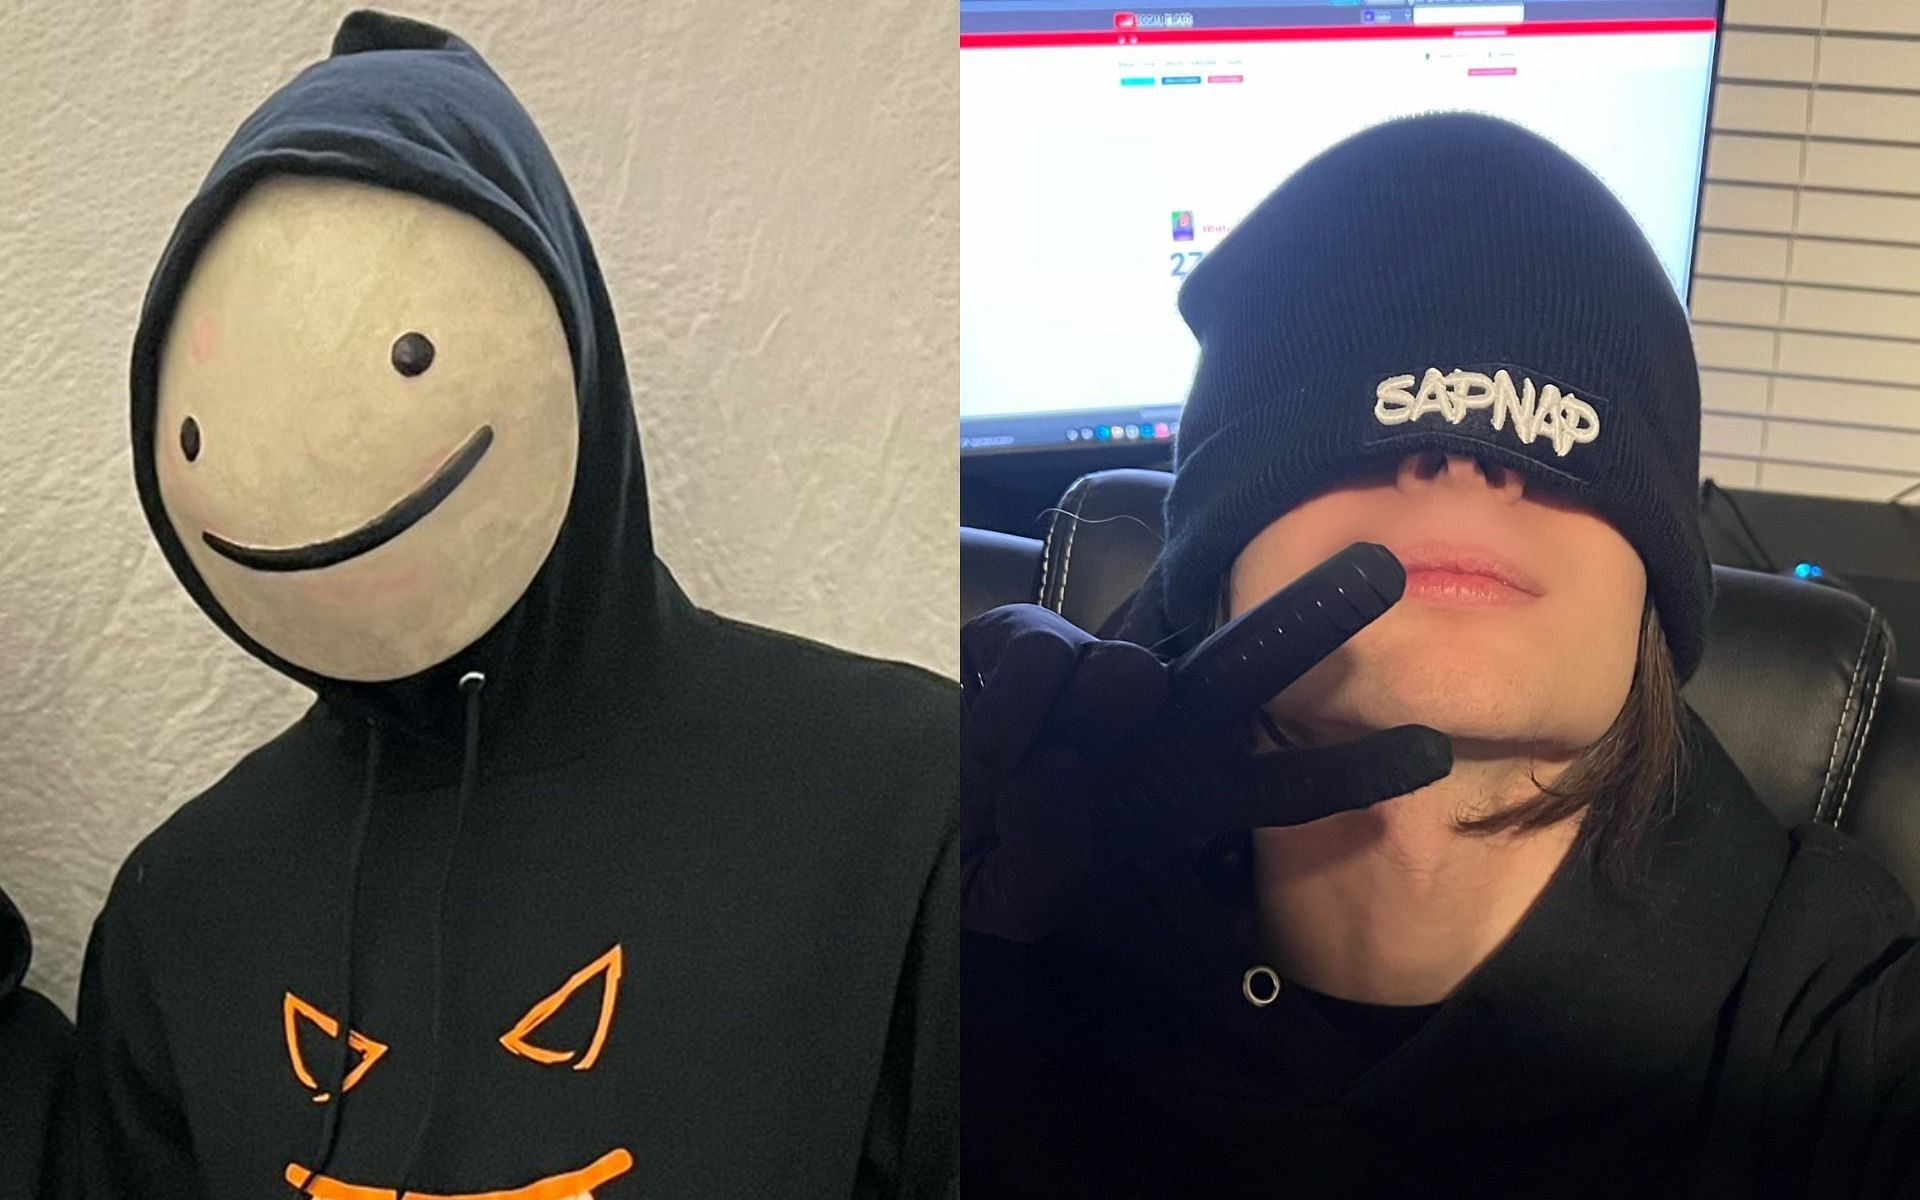 Dream face reveal leaked By Sapnap In Latest Twitter Post! 